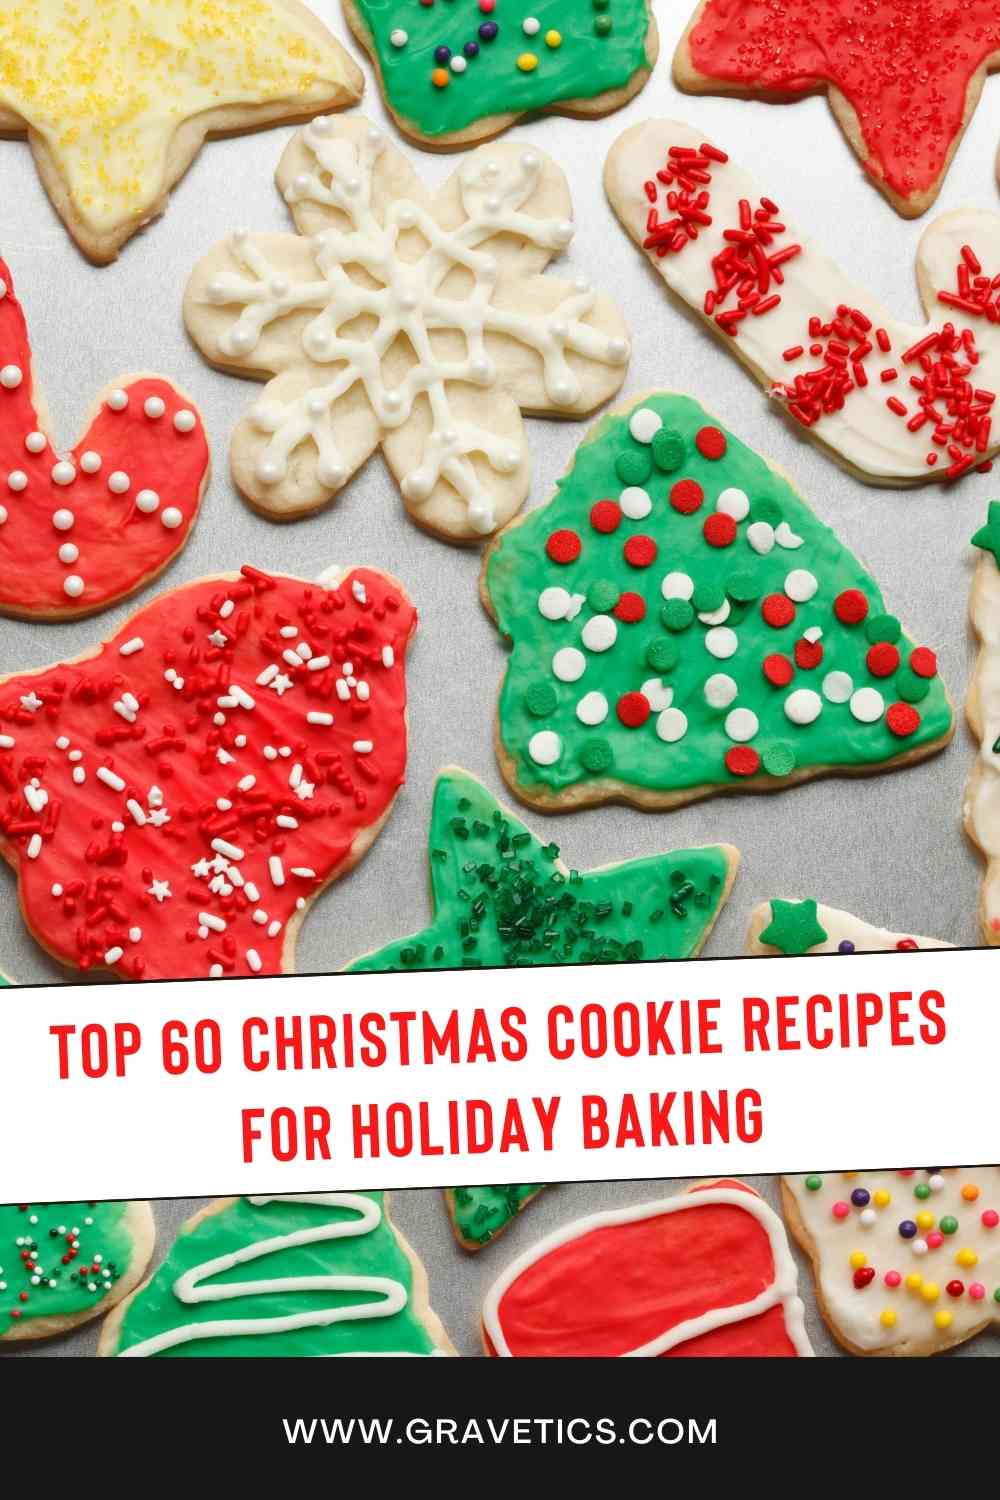 Top 60 Christmas Cookie Recipes For Holiday Baking